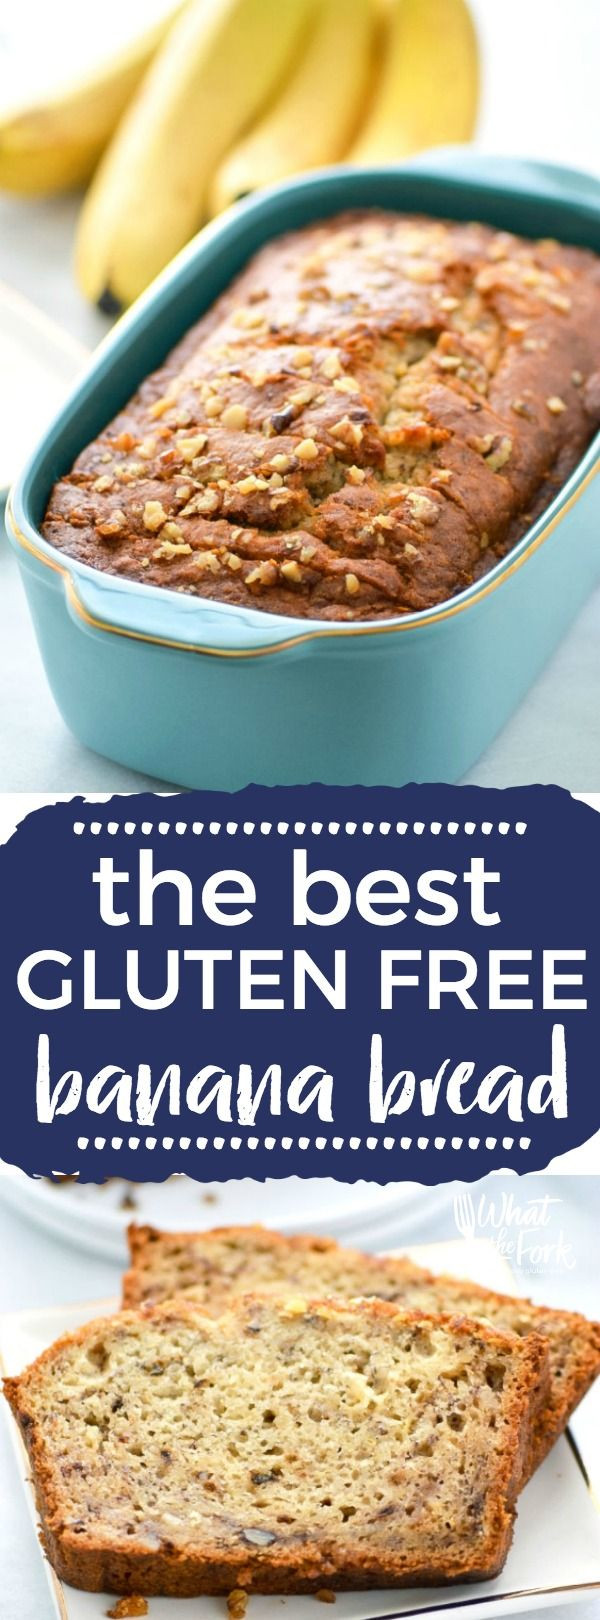 Easy Gluten Free Dairy Free Recipes
 1000 ideas about Gluten Free Foods on Pinterest